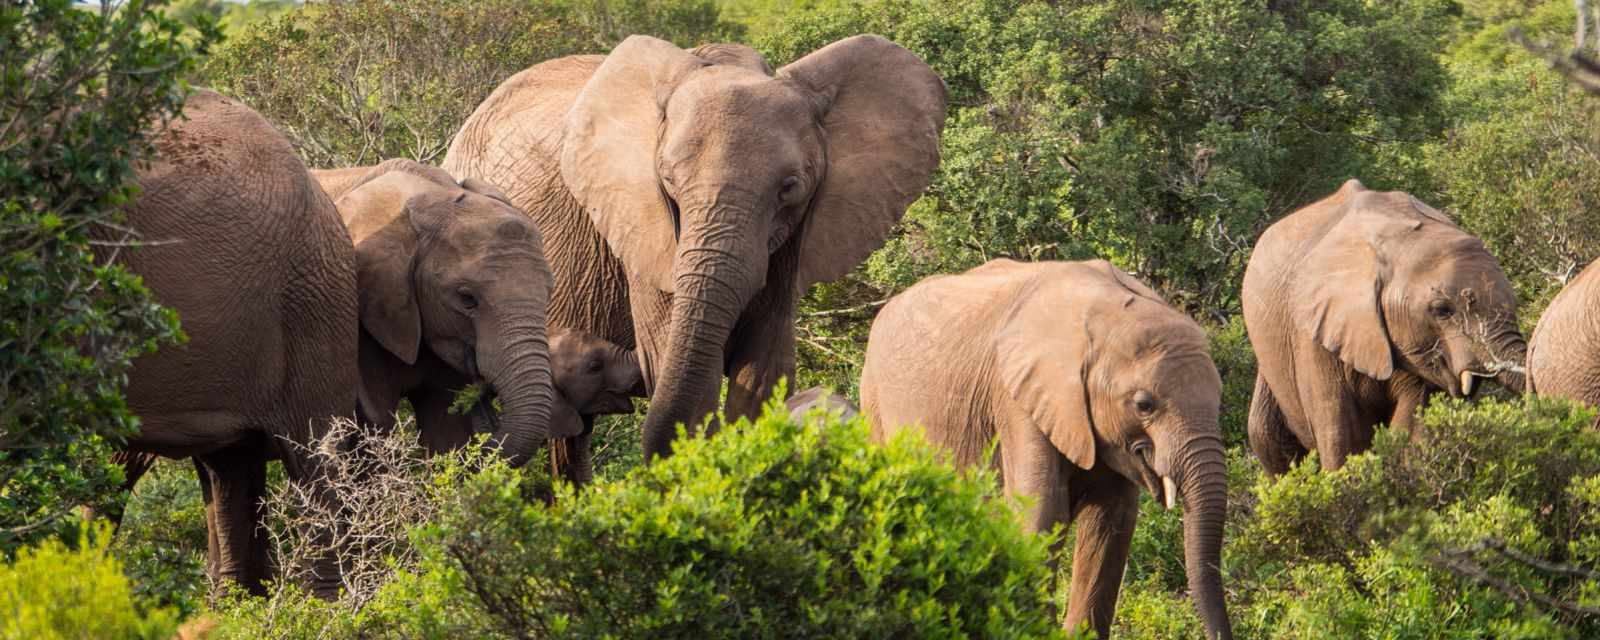 Self-Guided Safari in Addo Elephant National Park - 8 Facts